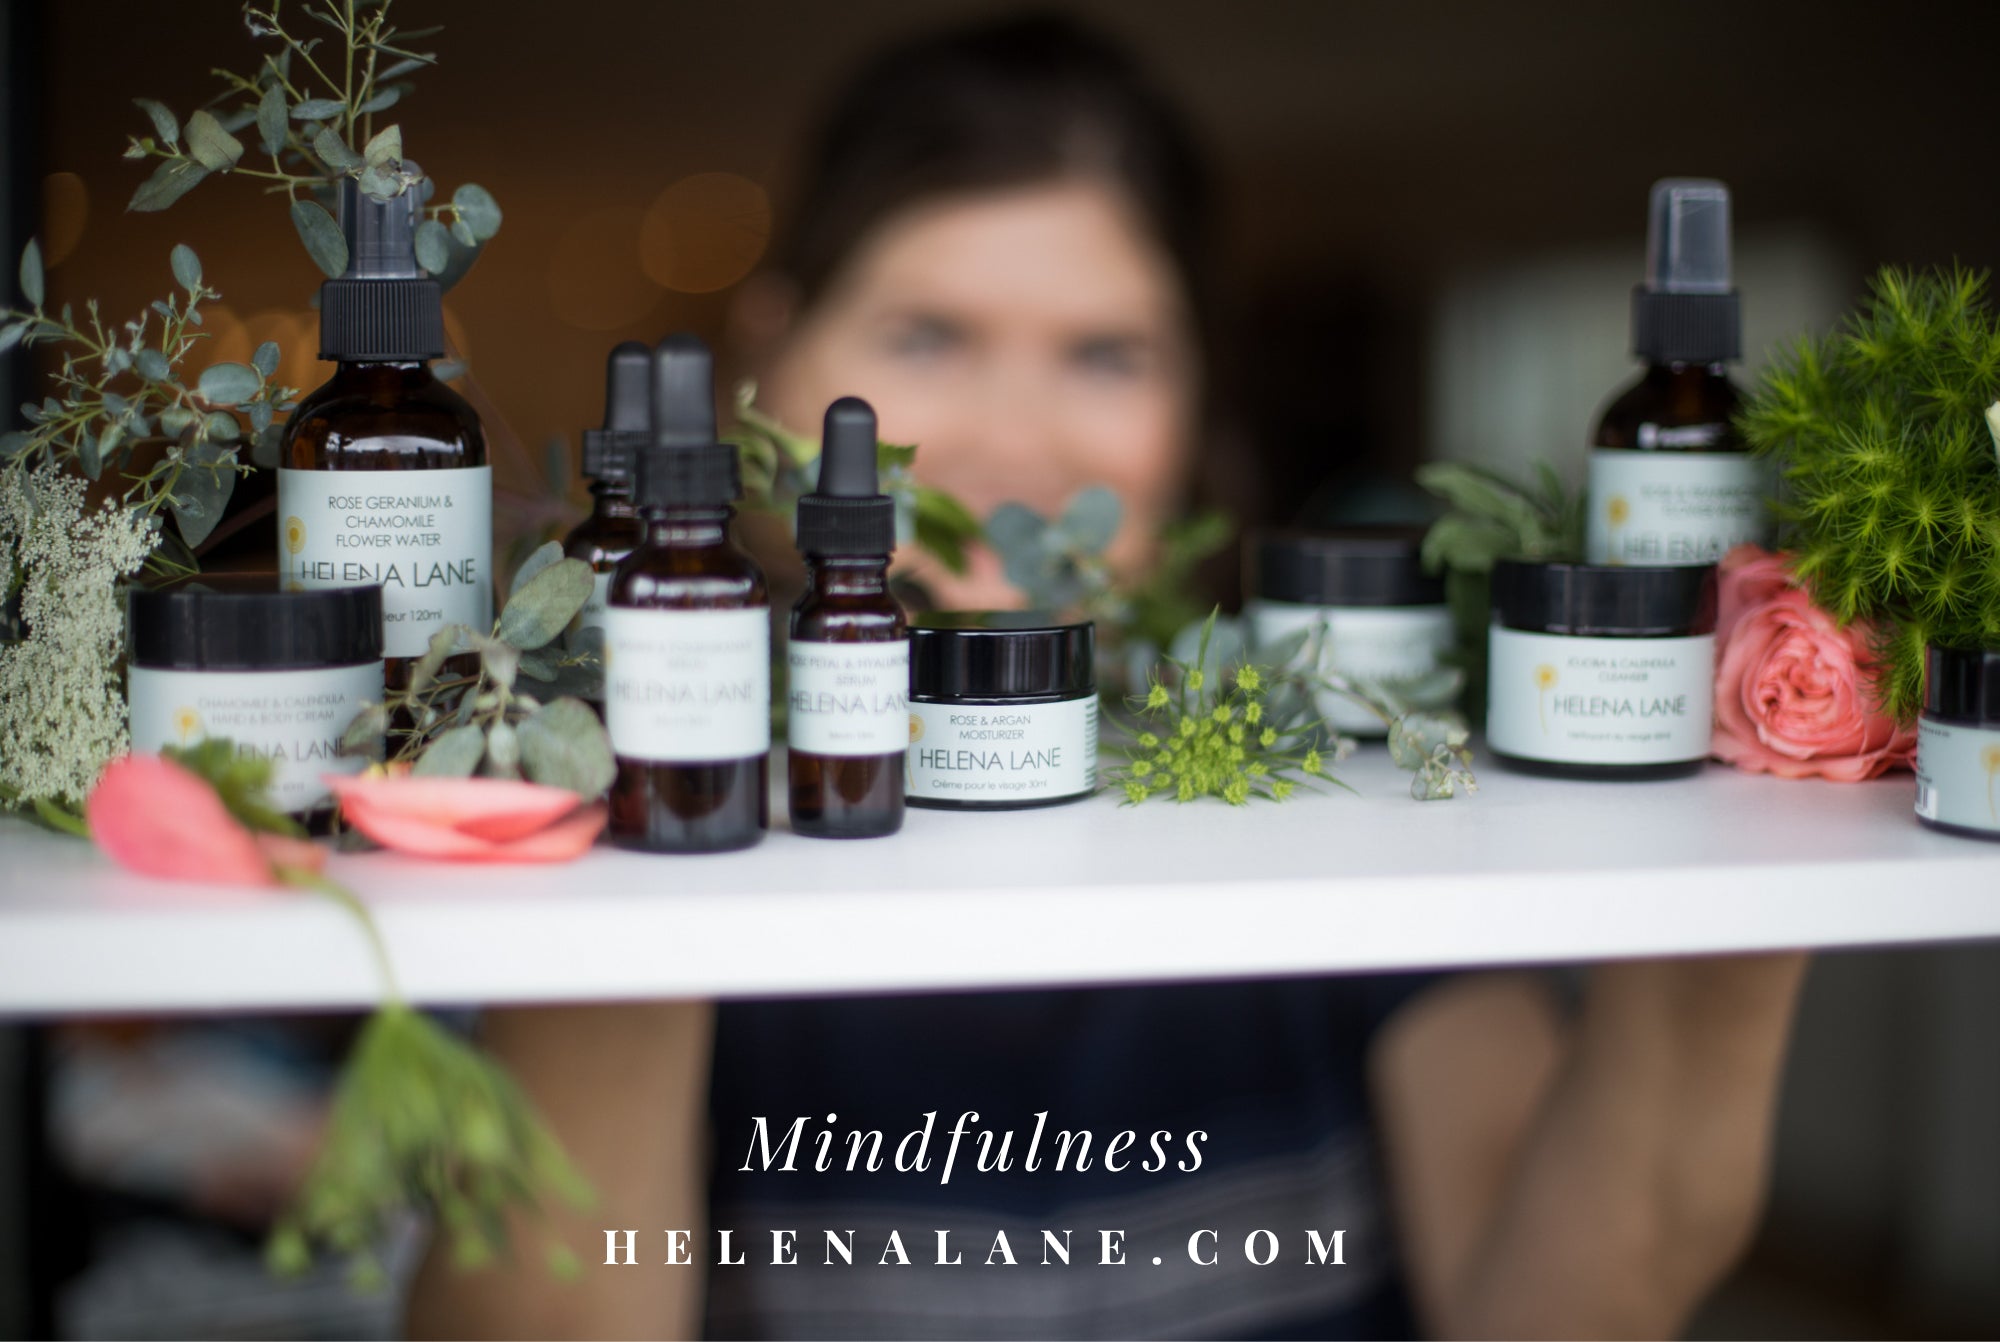 An aid in mindfulness | Skincare & Self Care